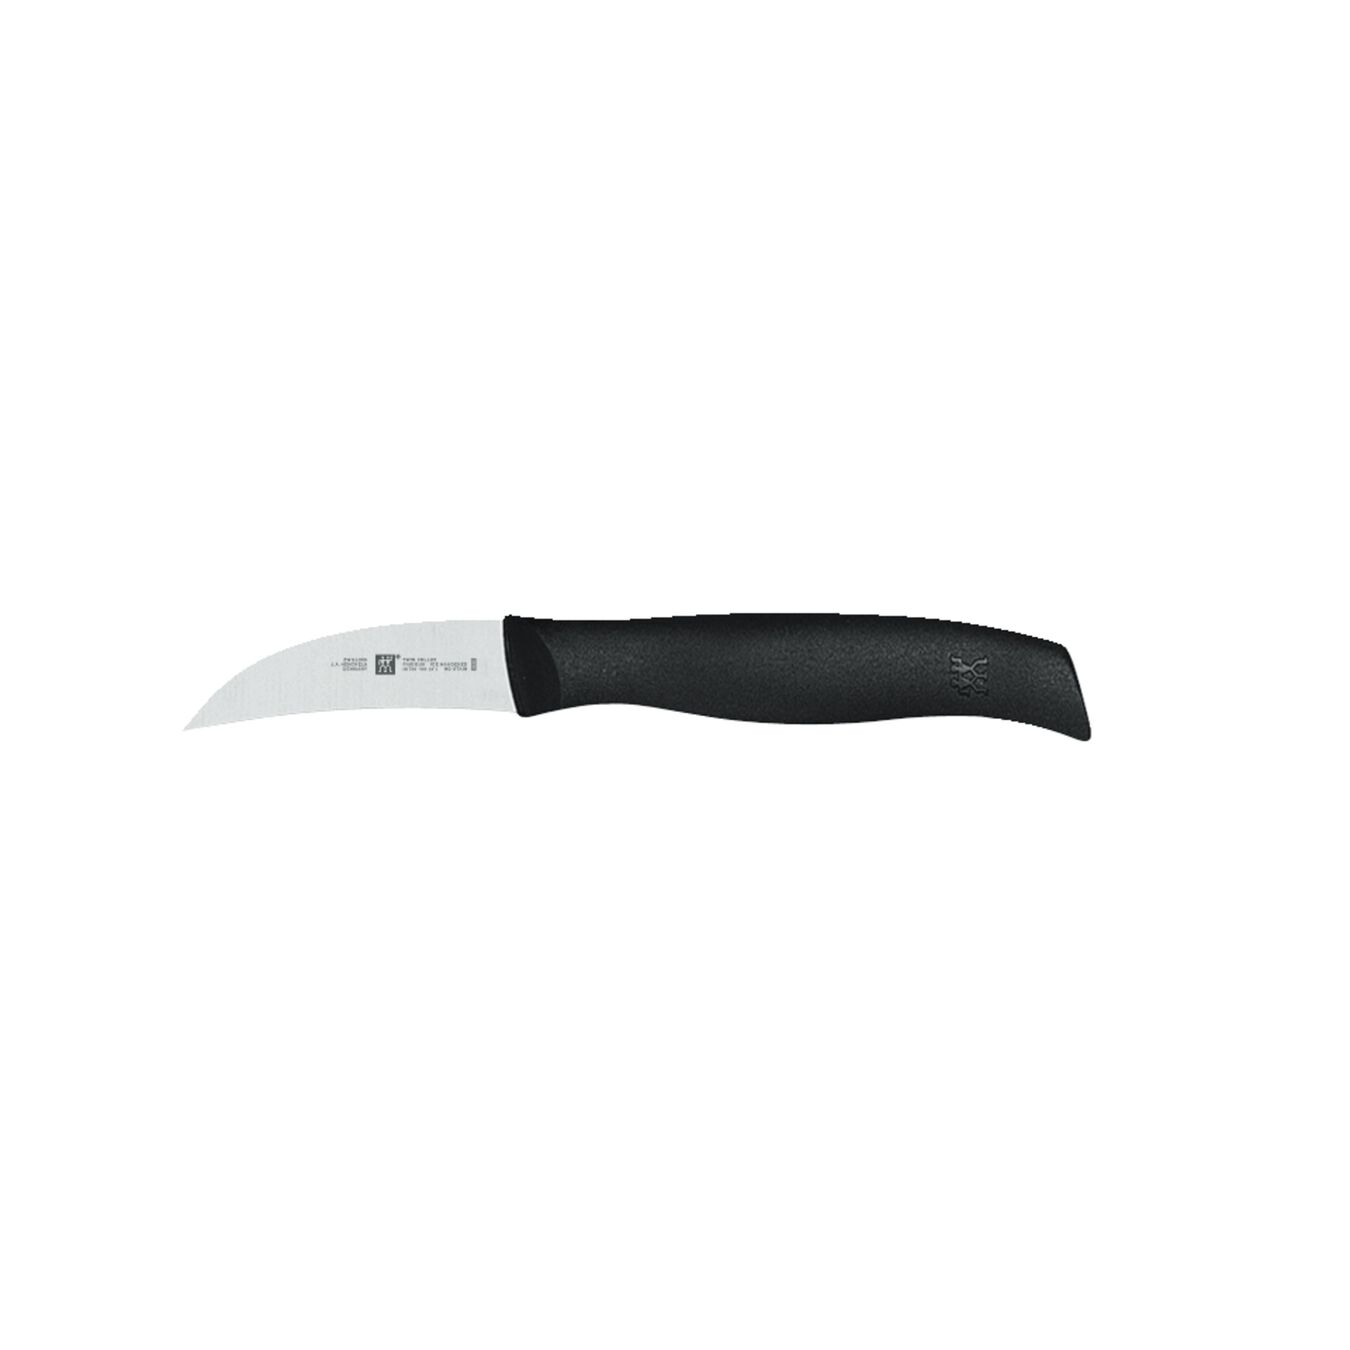 2.5 inch Peeling knife - Visual Imperfections,,large 1